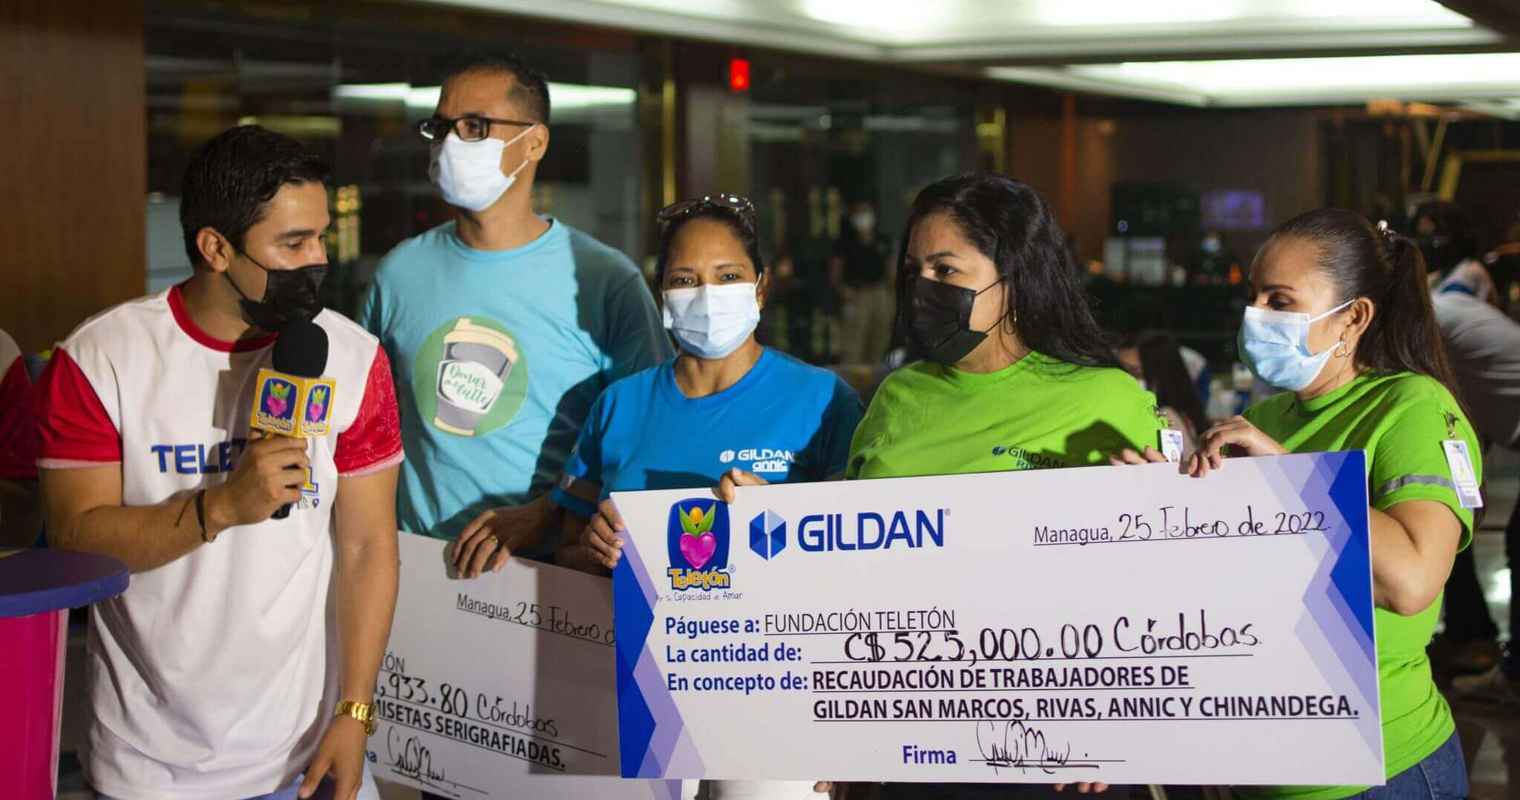 A man from Teleton Fundacion is speaking to 3 Gildan employees who are holding up a large cheque.